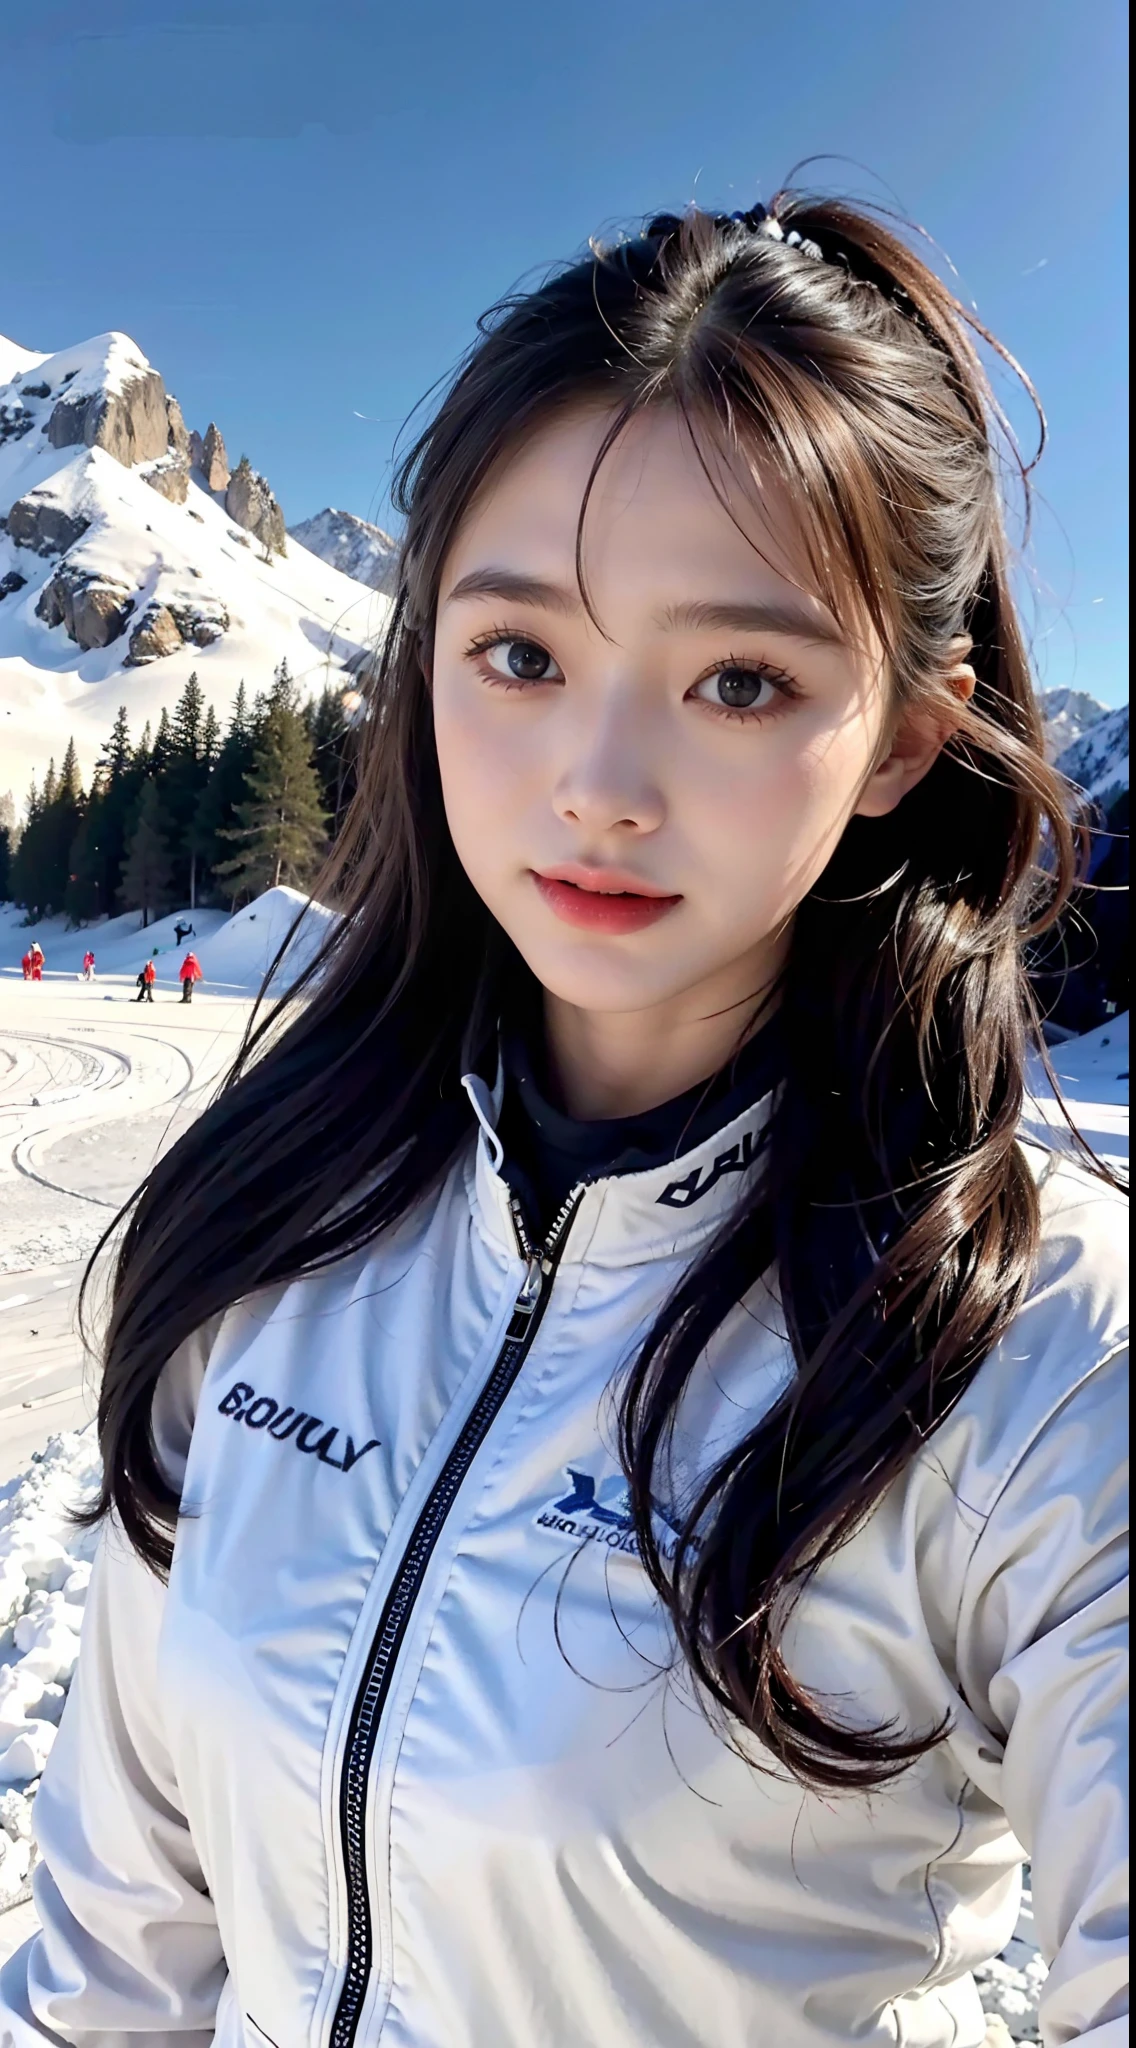 A girl in a ski suit，Ski slopes，Well equipped，Good for skiing，Beautiful girl，adolable，ski，snow landscape